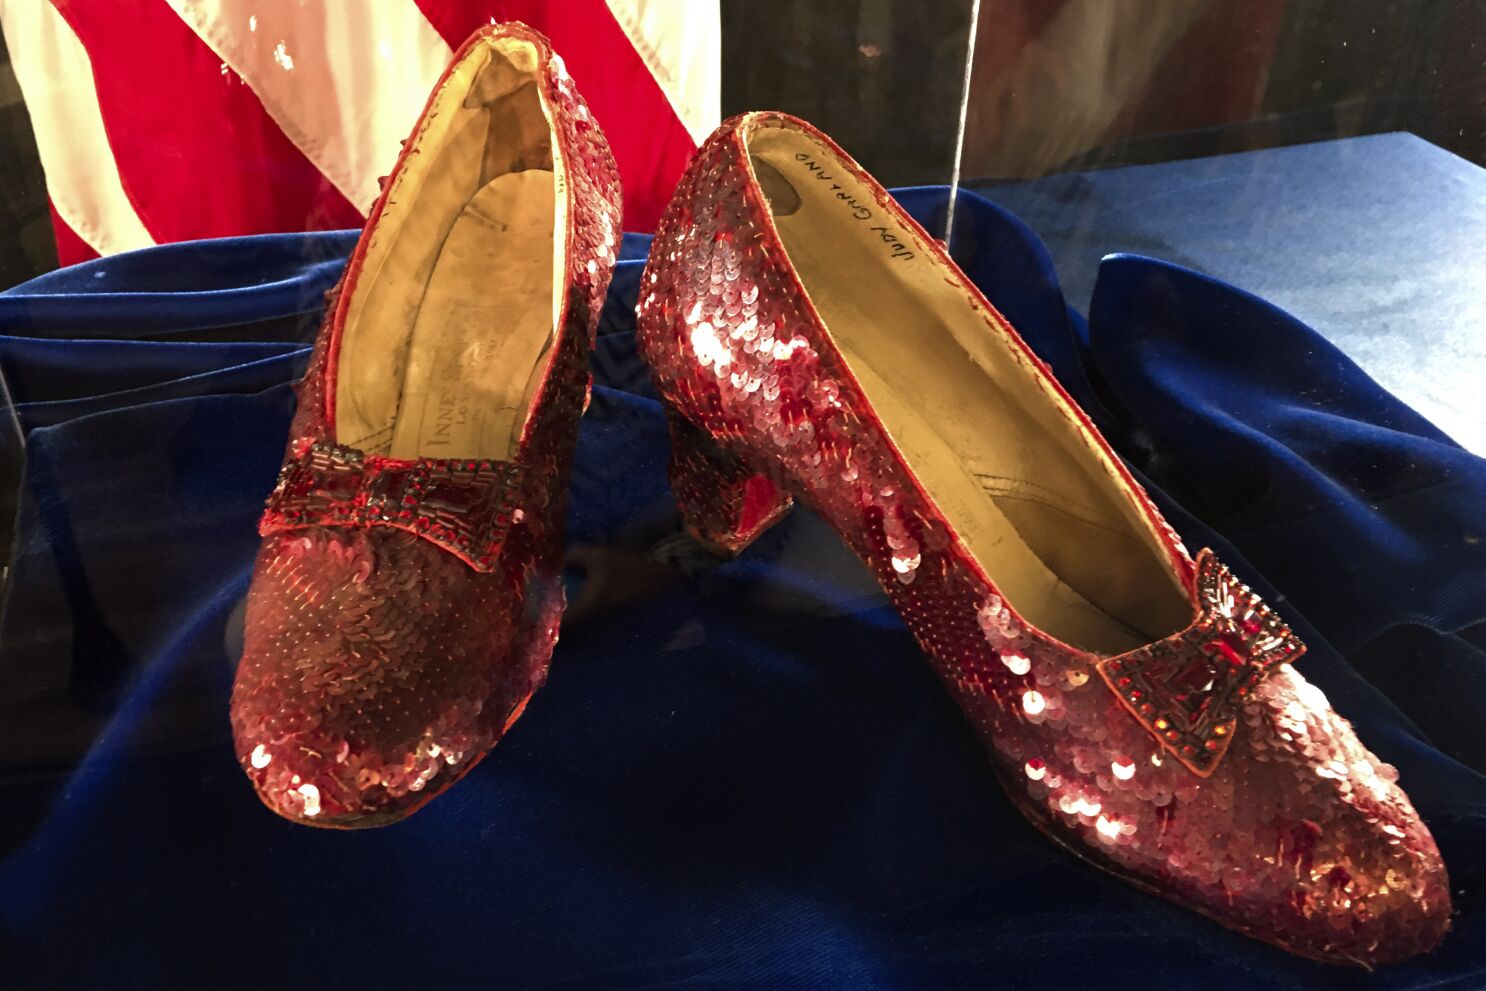 Forstærker statsminister grå Man indicted in theft of Judy Garland's ruby slippers - Los Angeles Times